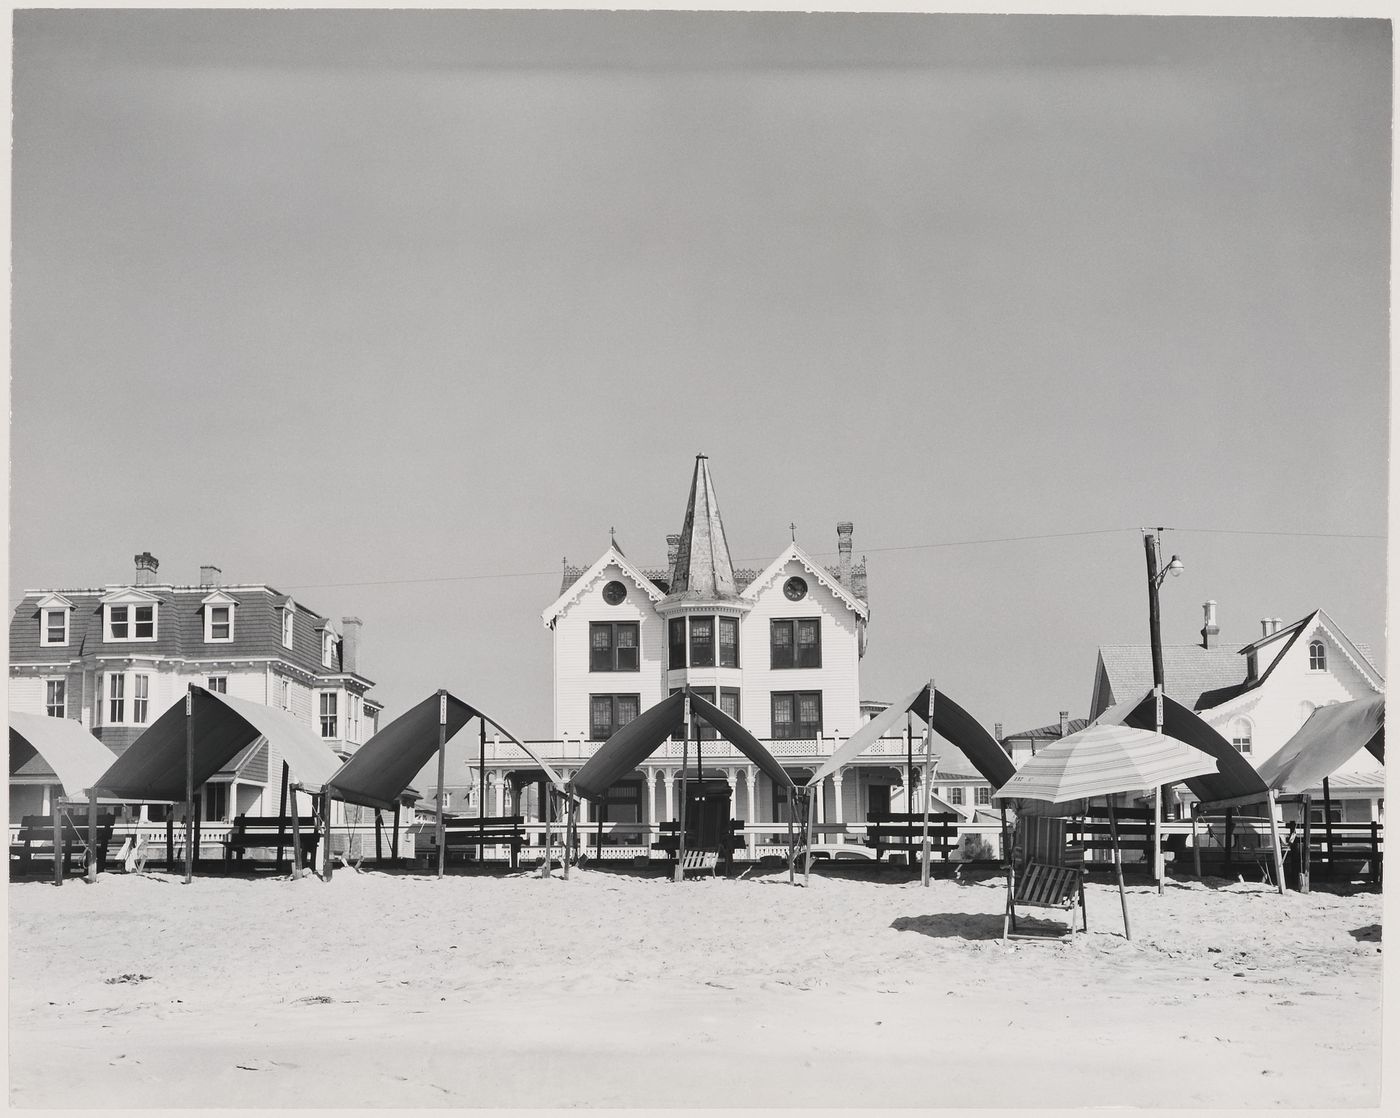 Beach and Summer Houses, Cape May, New Jersey